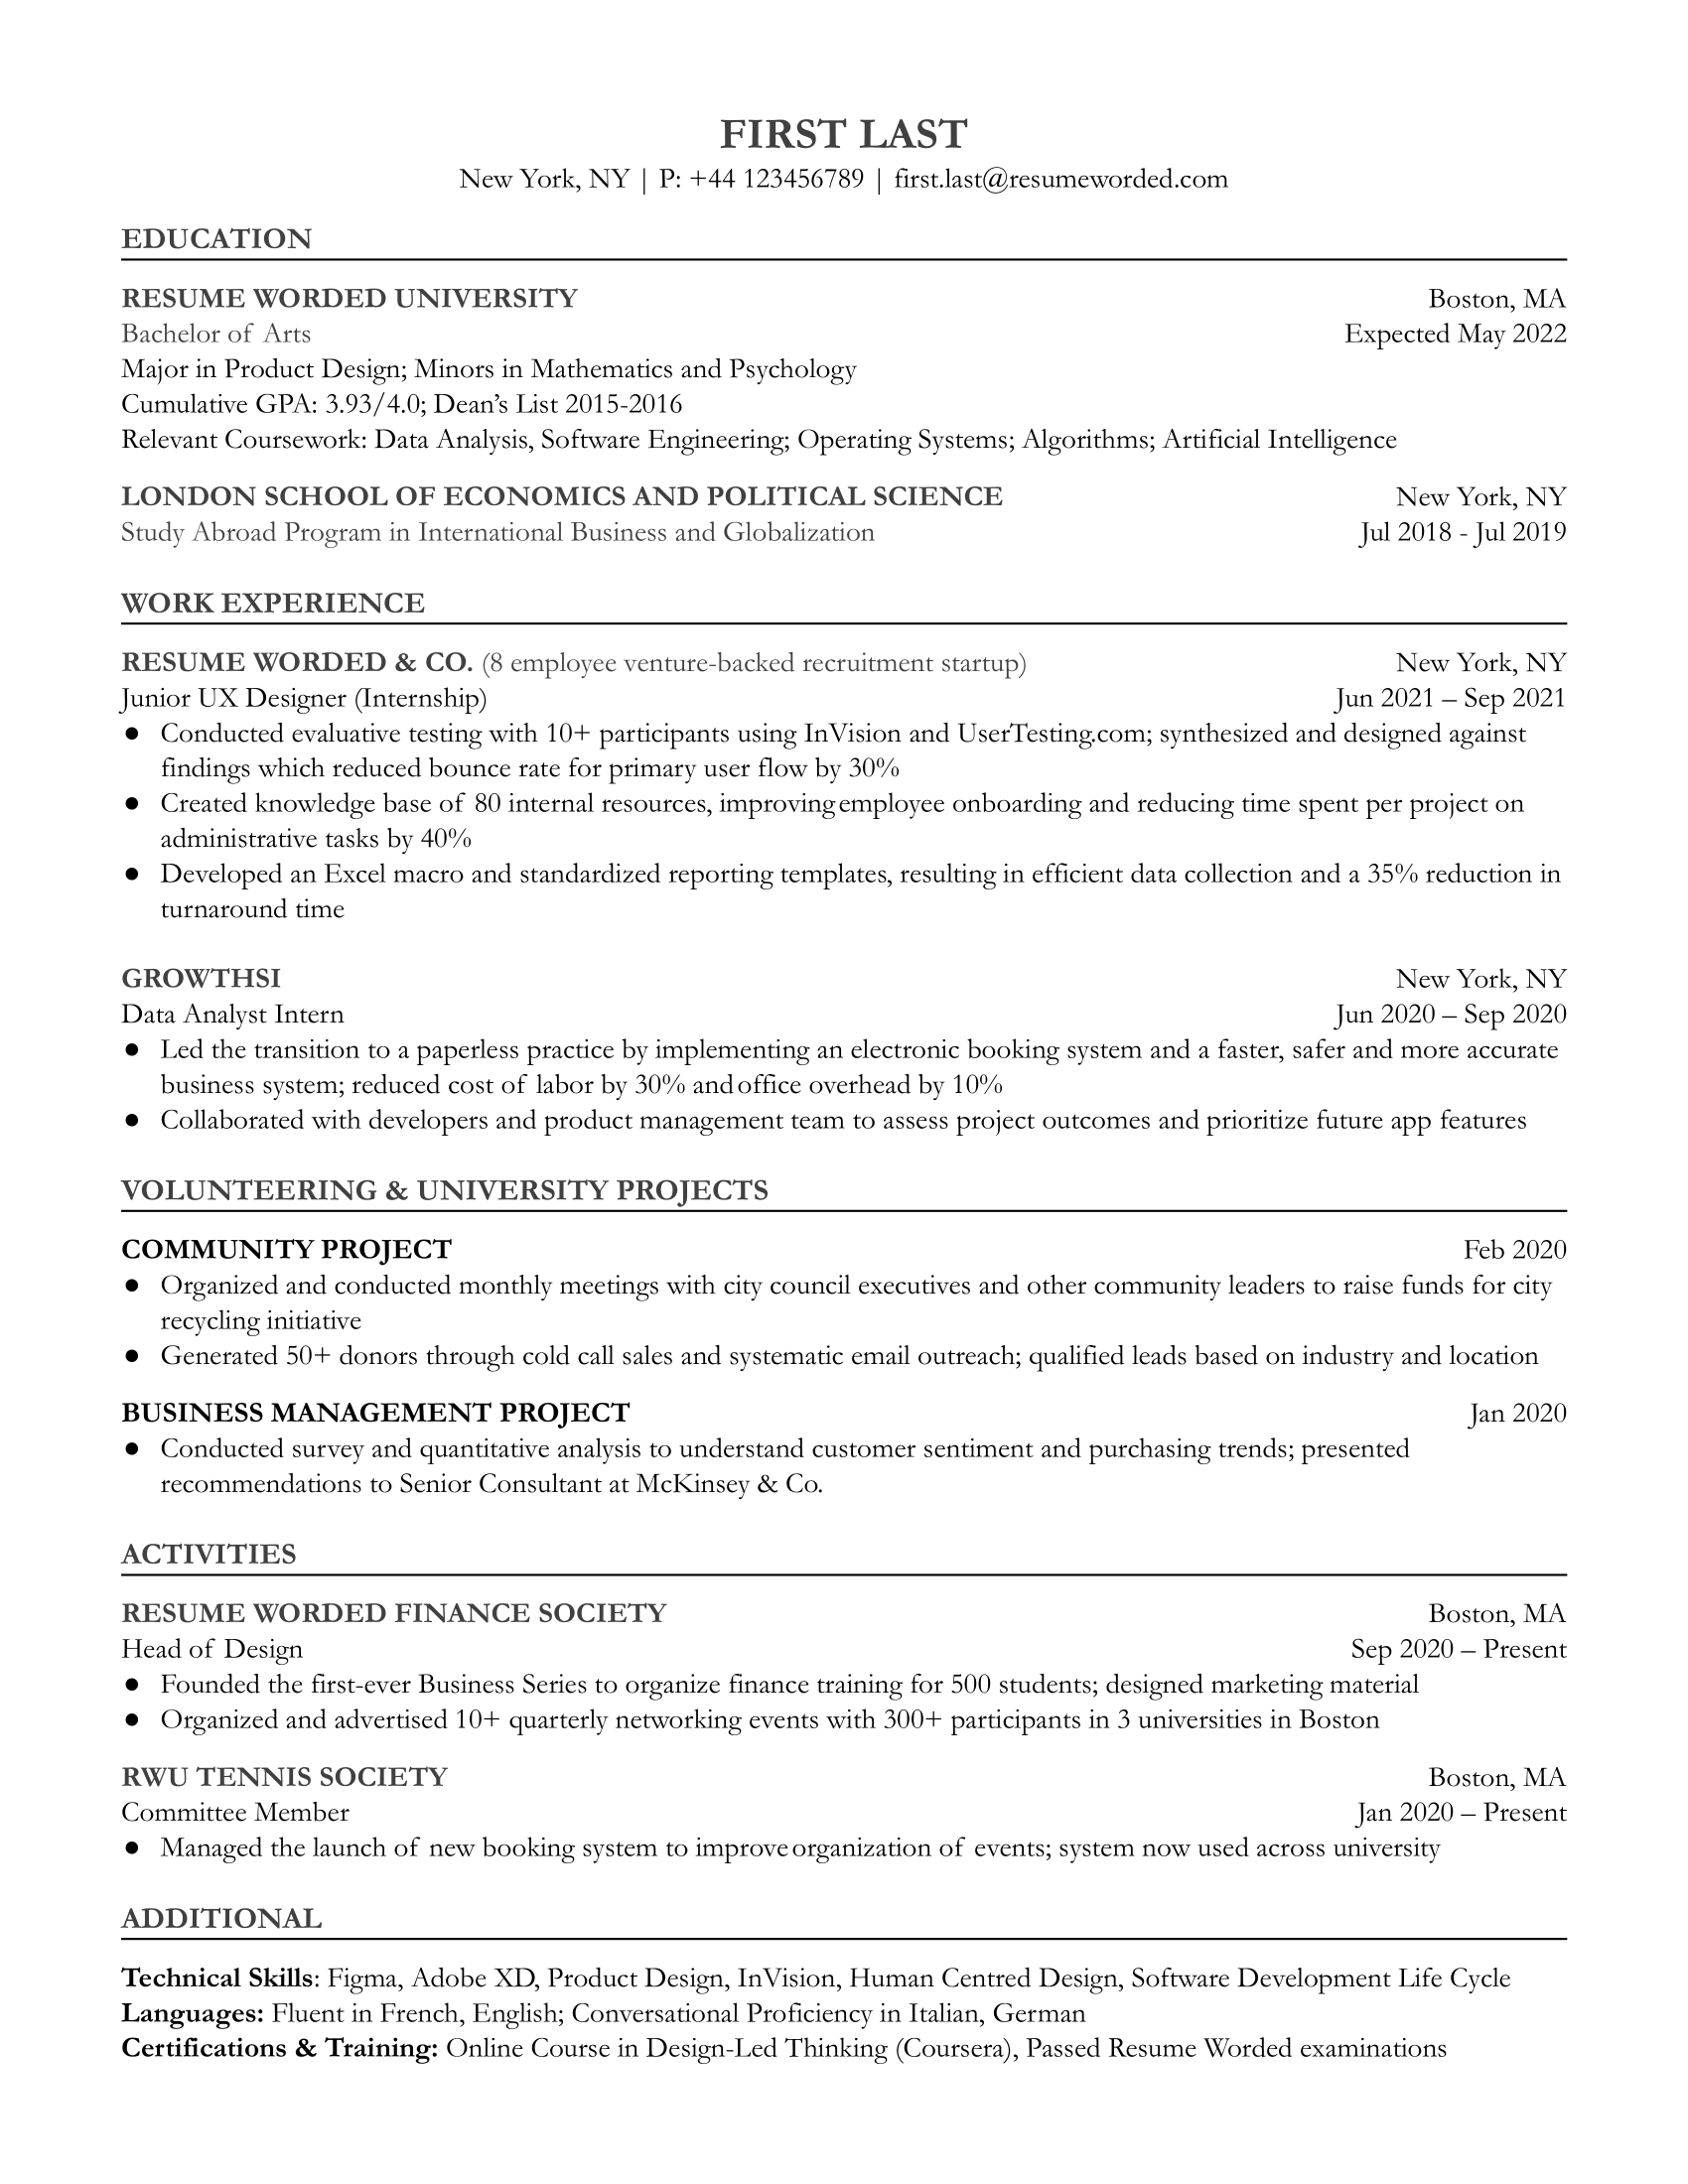 Entry-level UX designer resume sample with a focus on design process and relevant projects.